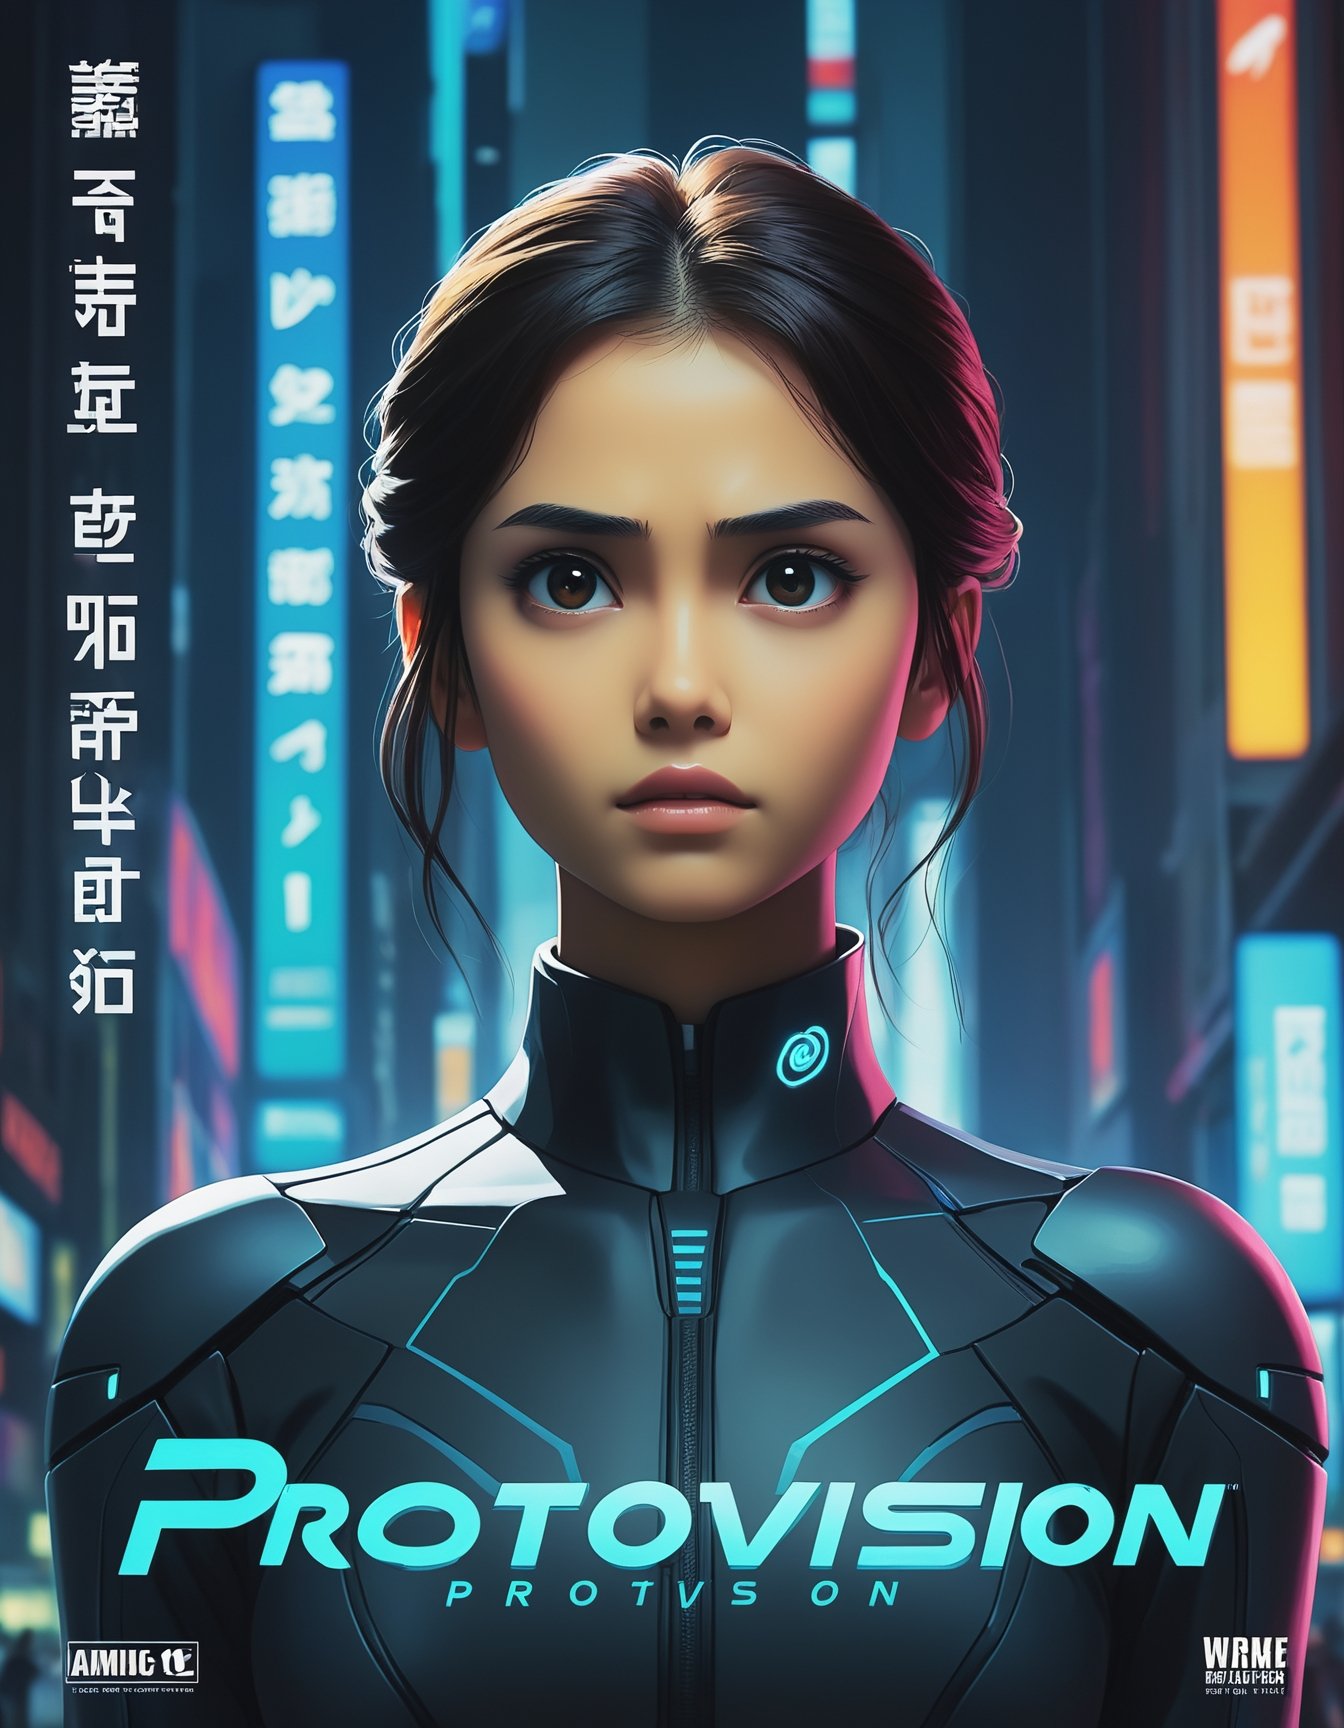 (movie poster with title and text graphics:1.3) (under the title banner text logo "PROTOVISION":1.3), a lone beautiful woman stands poised, waiting, an anxious look on her beautiful face, illustrated by {1-3$$ and by $$$__animeartist__|__animeartist__|__animeartist__}